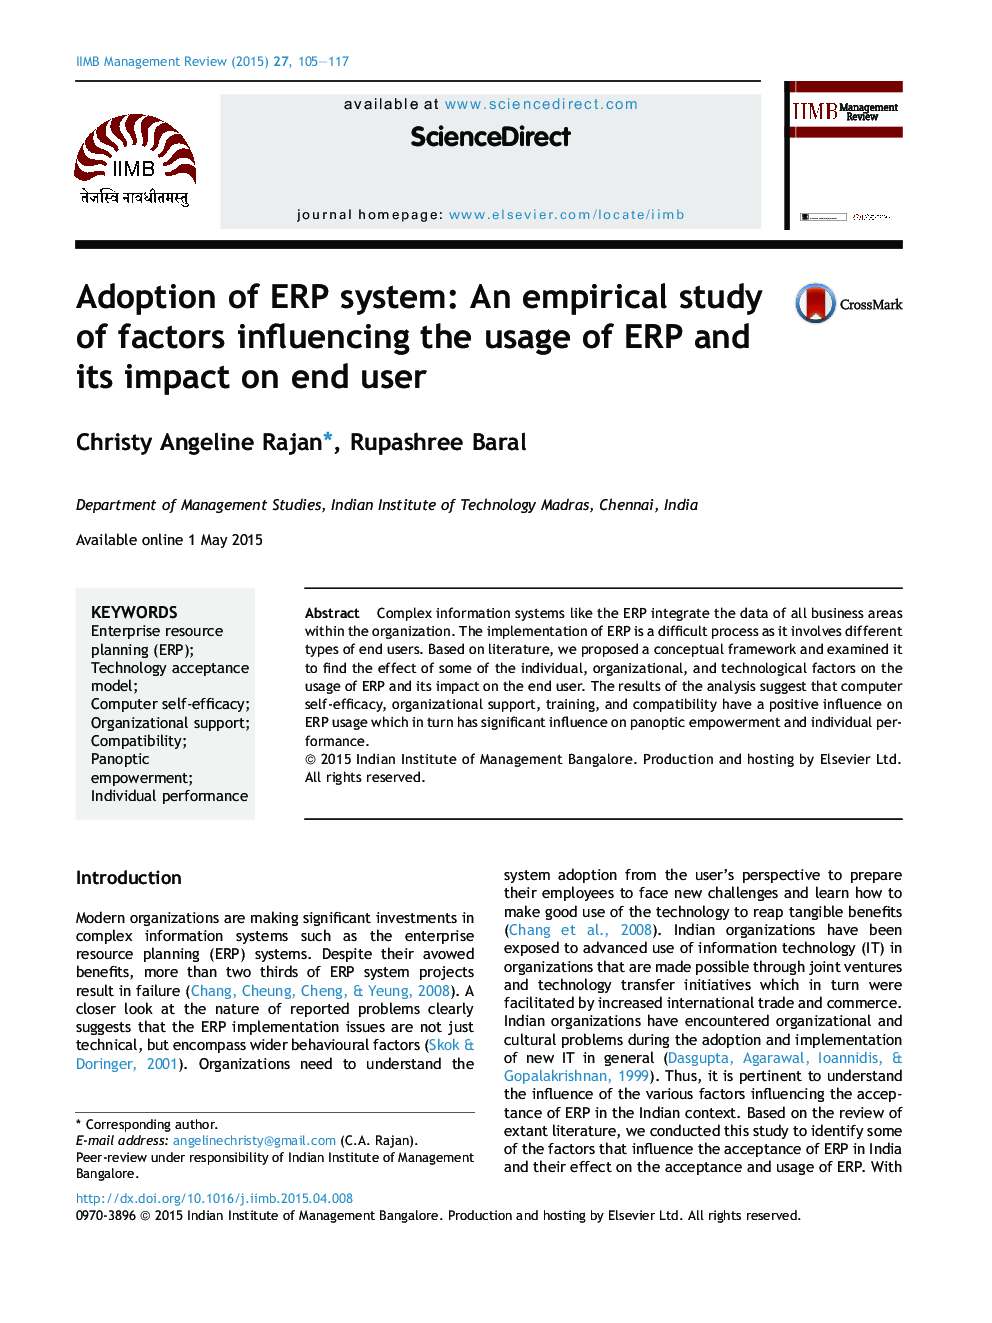 Adoption of ERP system: An empirical study of factors influencing the usage of ERP and its impact on end user 